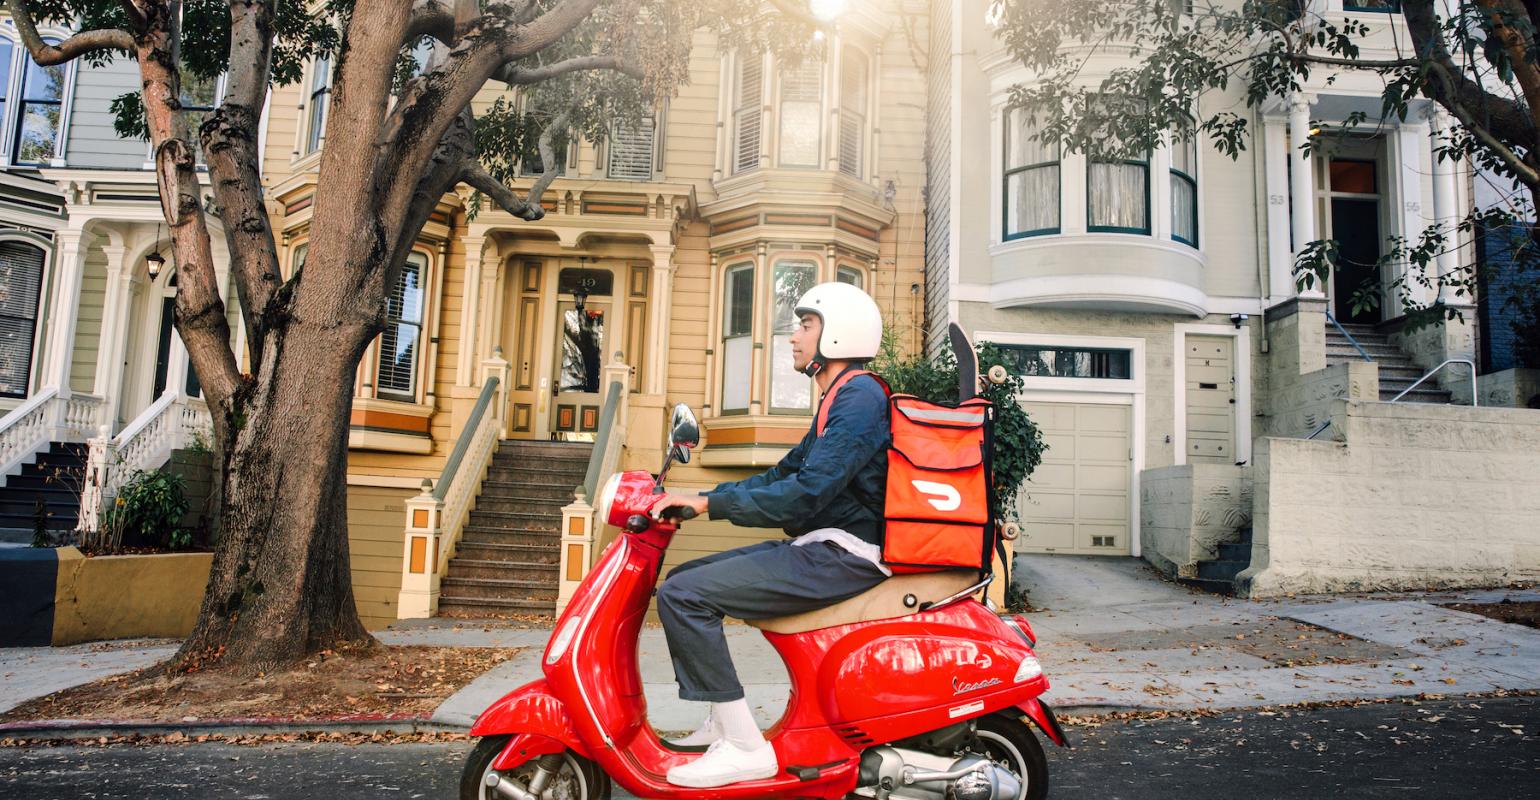 18+ Proven Tips to Make Money with DoorDash in 2023